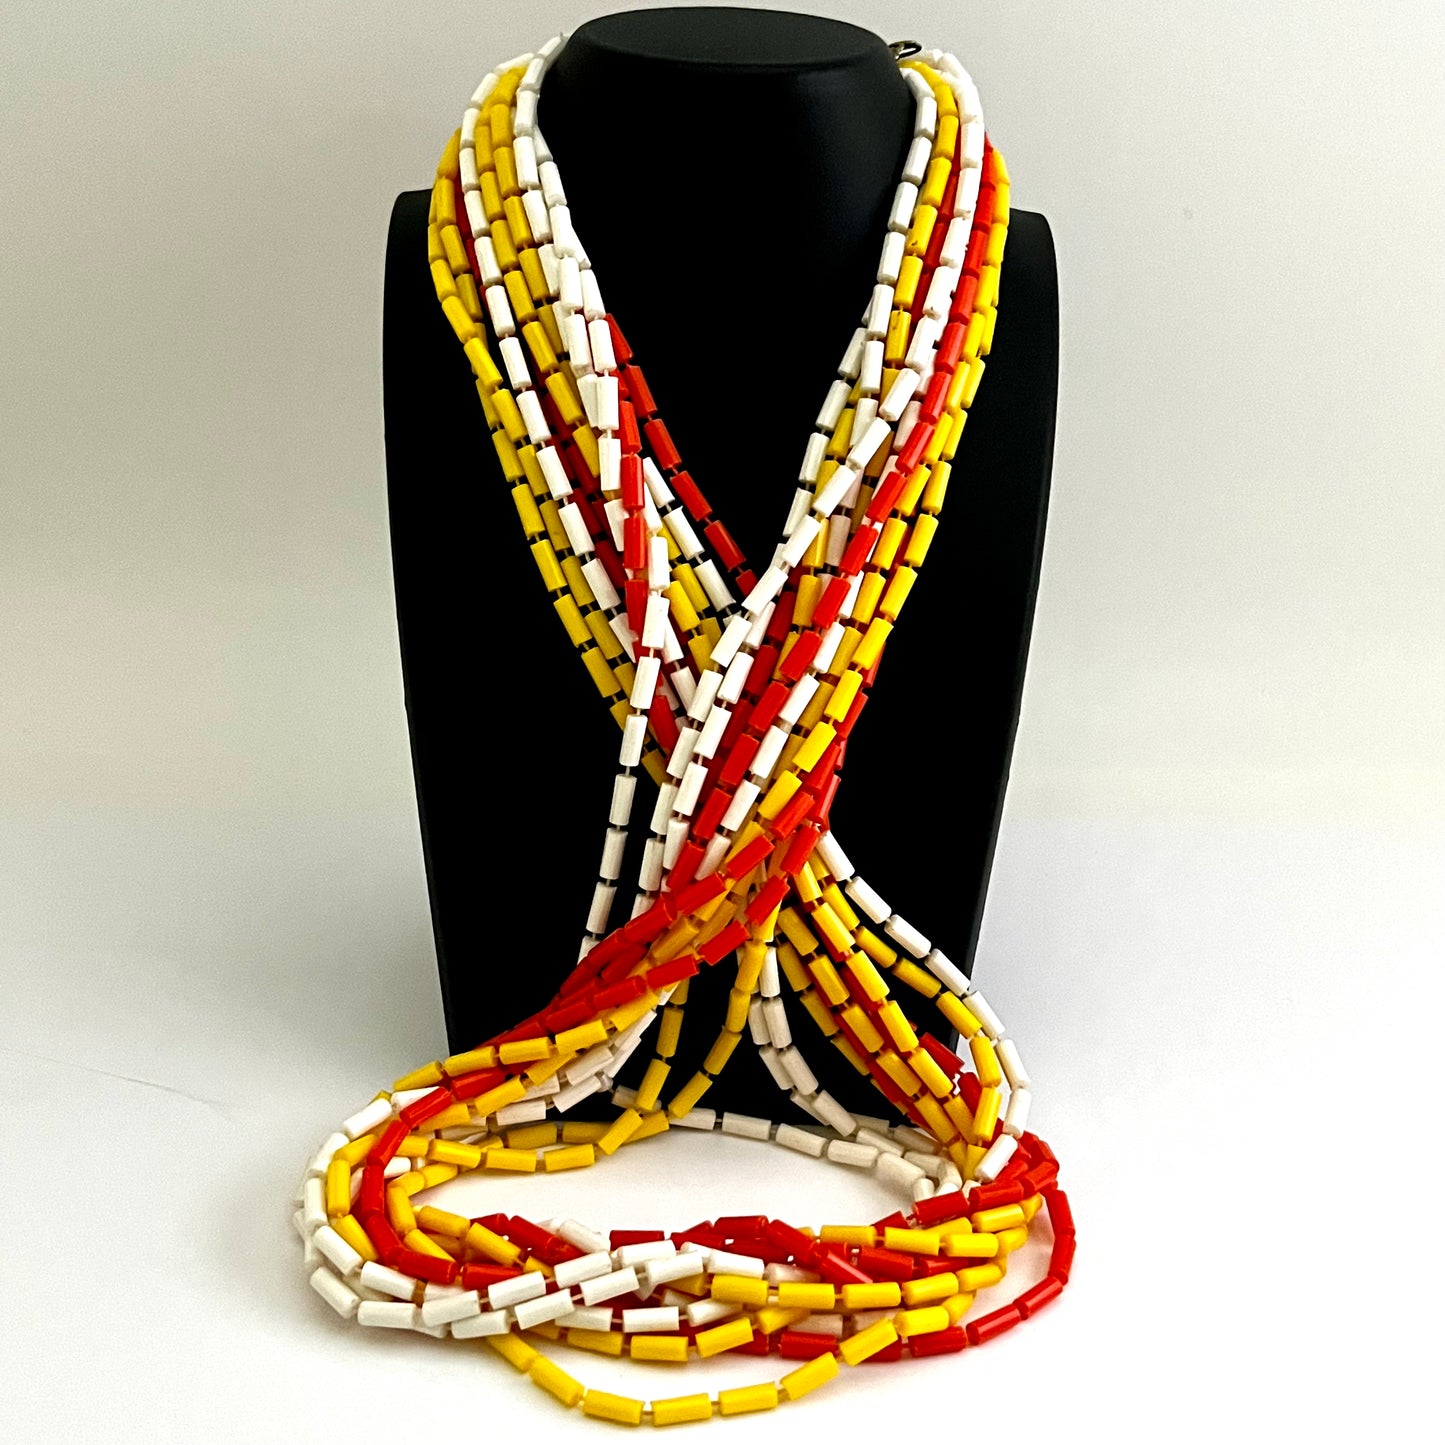 Late 60s/ Early 70s Multi-Colored Bead Necklace